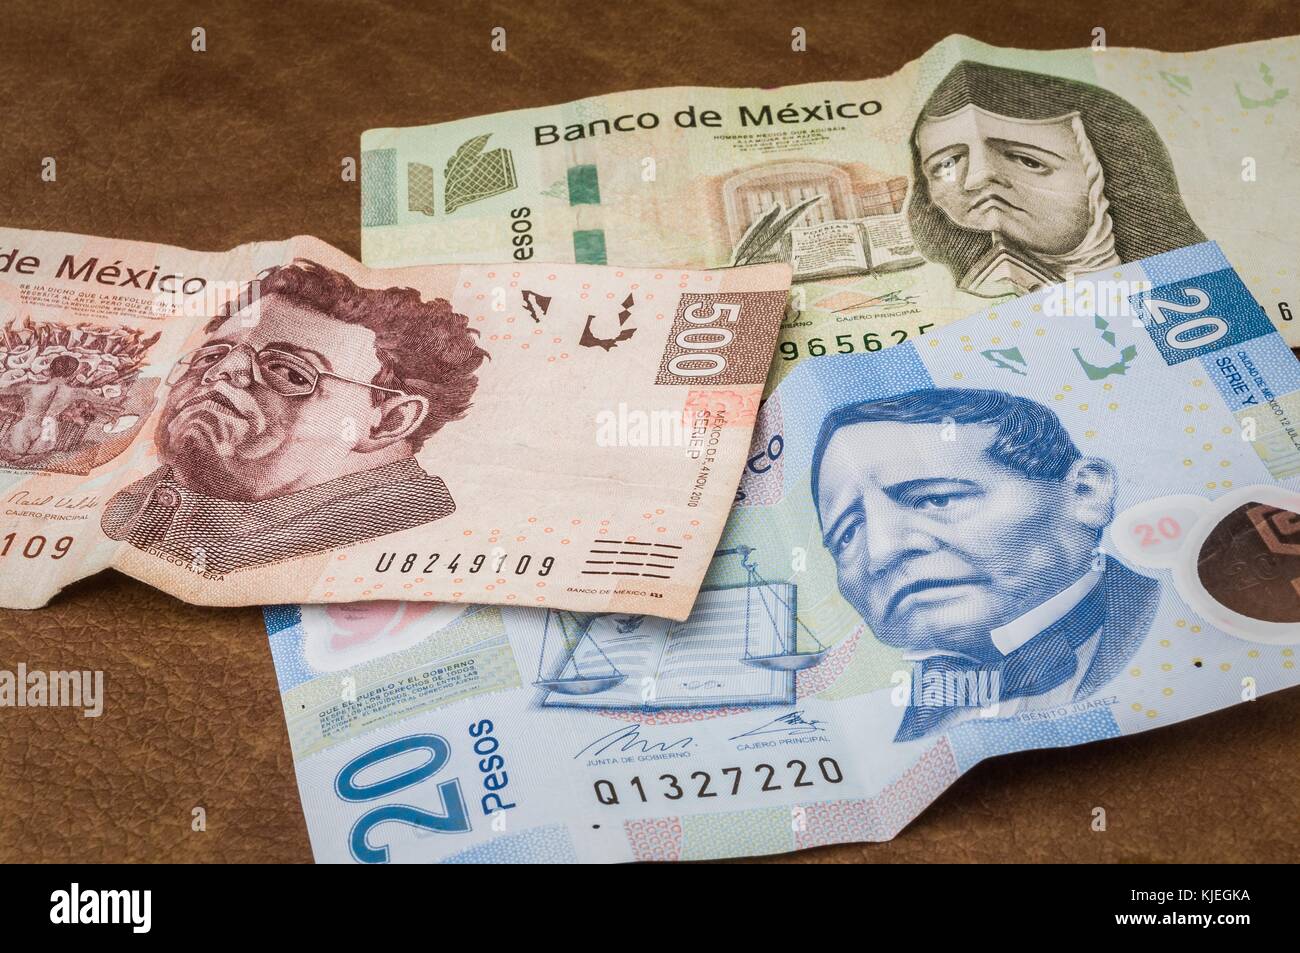 Some bills of 20, 200 and 500 mexican pesos seems to be sad. Stock Photo